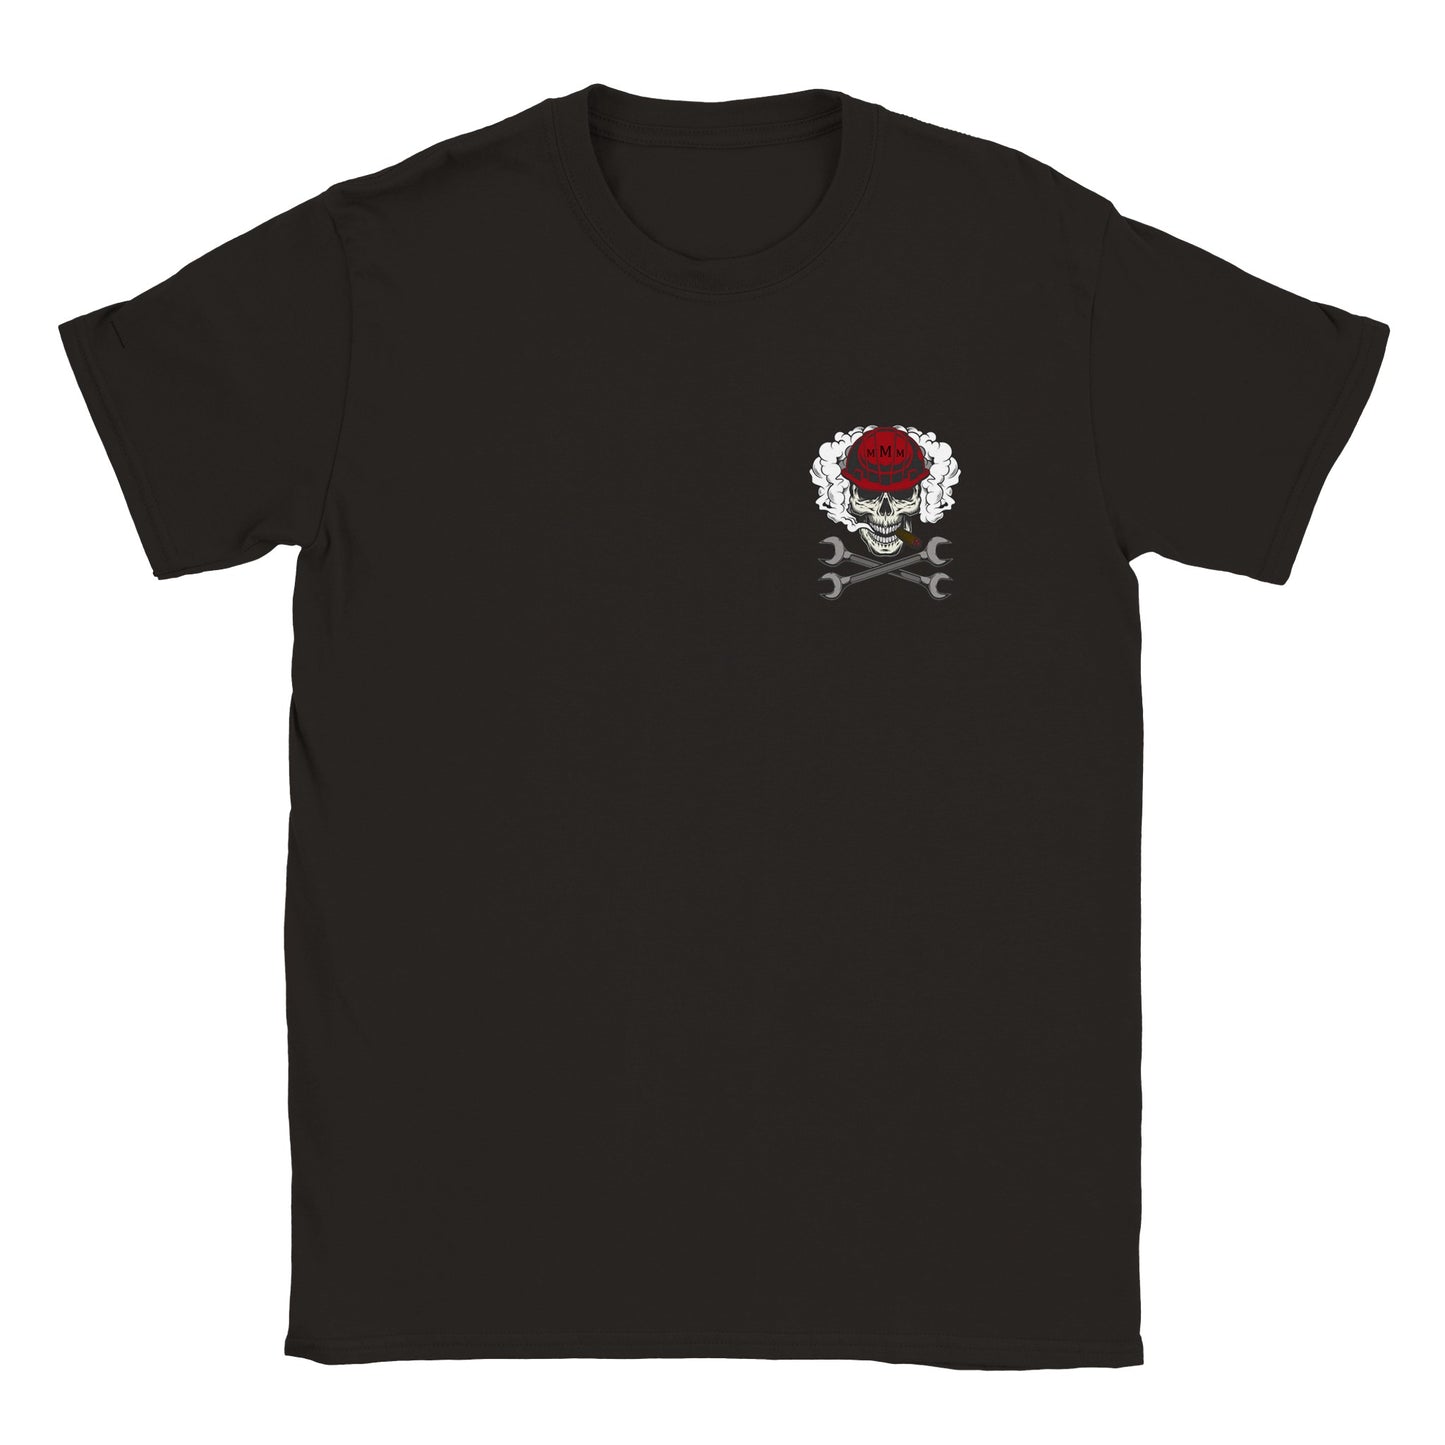 MMM T-shirt: First edition Red - Classic